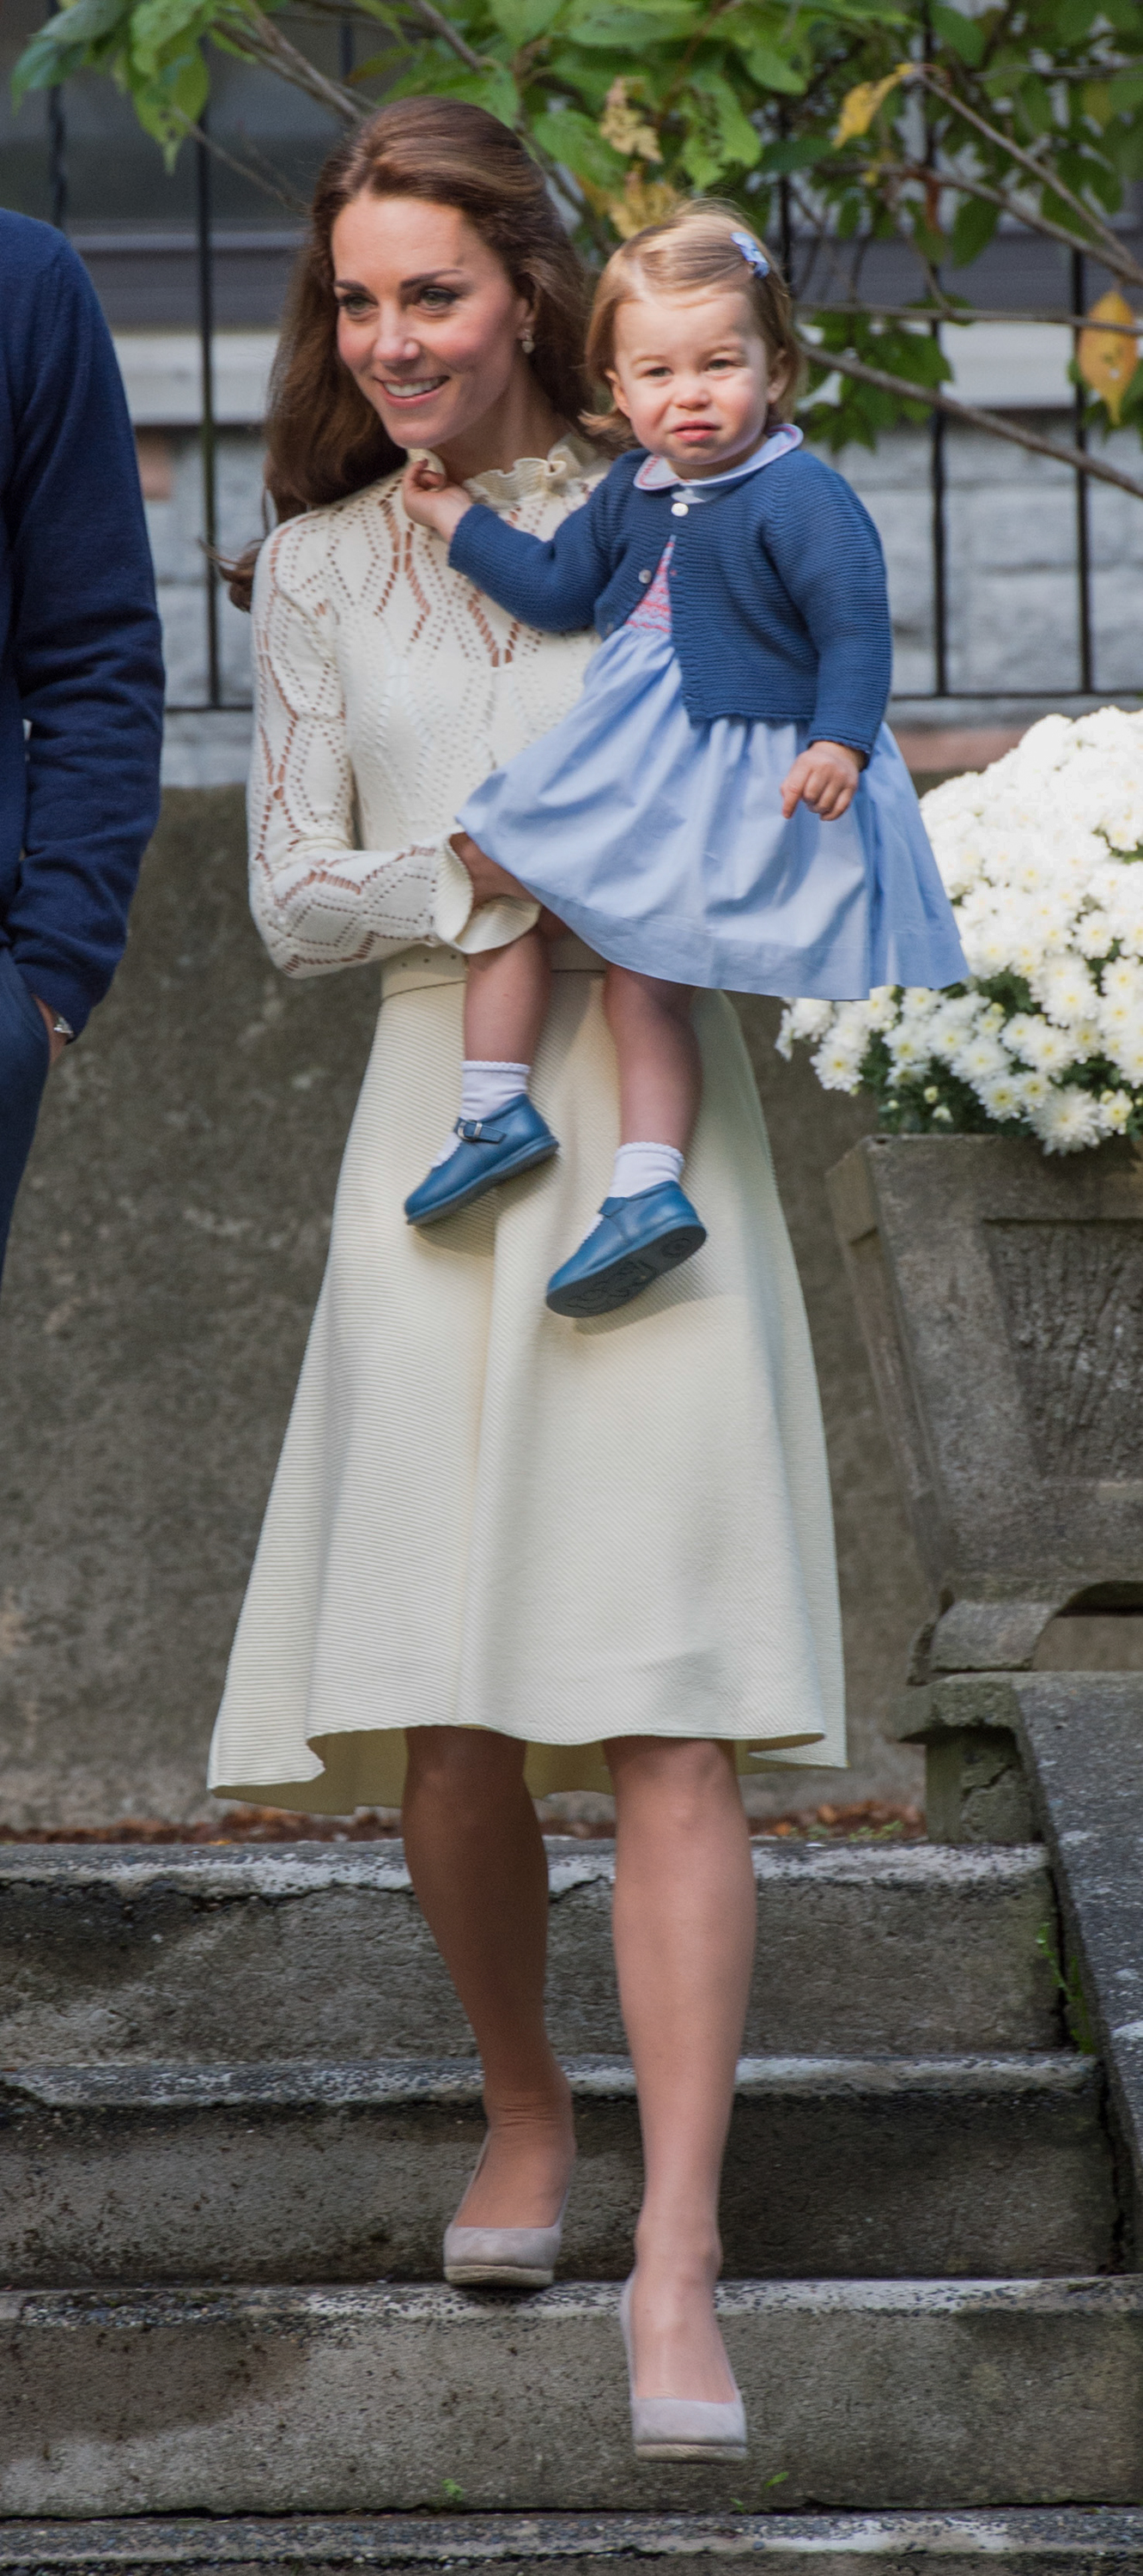 <p><a href="https://www.wonderwall.com/celebrity/profiles/overview/duchess-kate-1356.article">Duchess Kate</a> carried Princess Charlotte while attending a children's party for military families during a royal tour of Canada in Victoria on Sept. 29, 2016.</p>